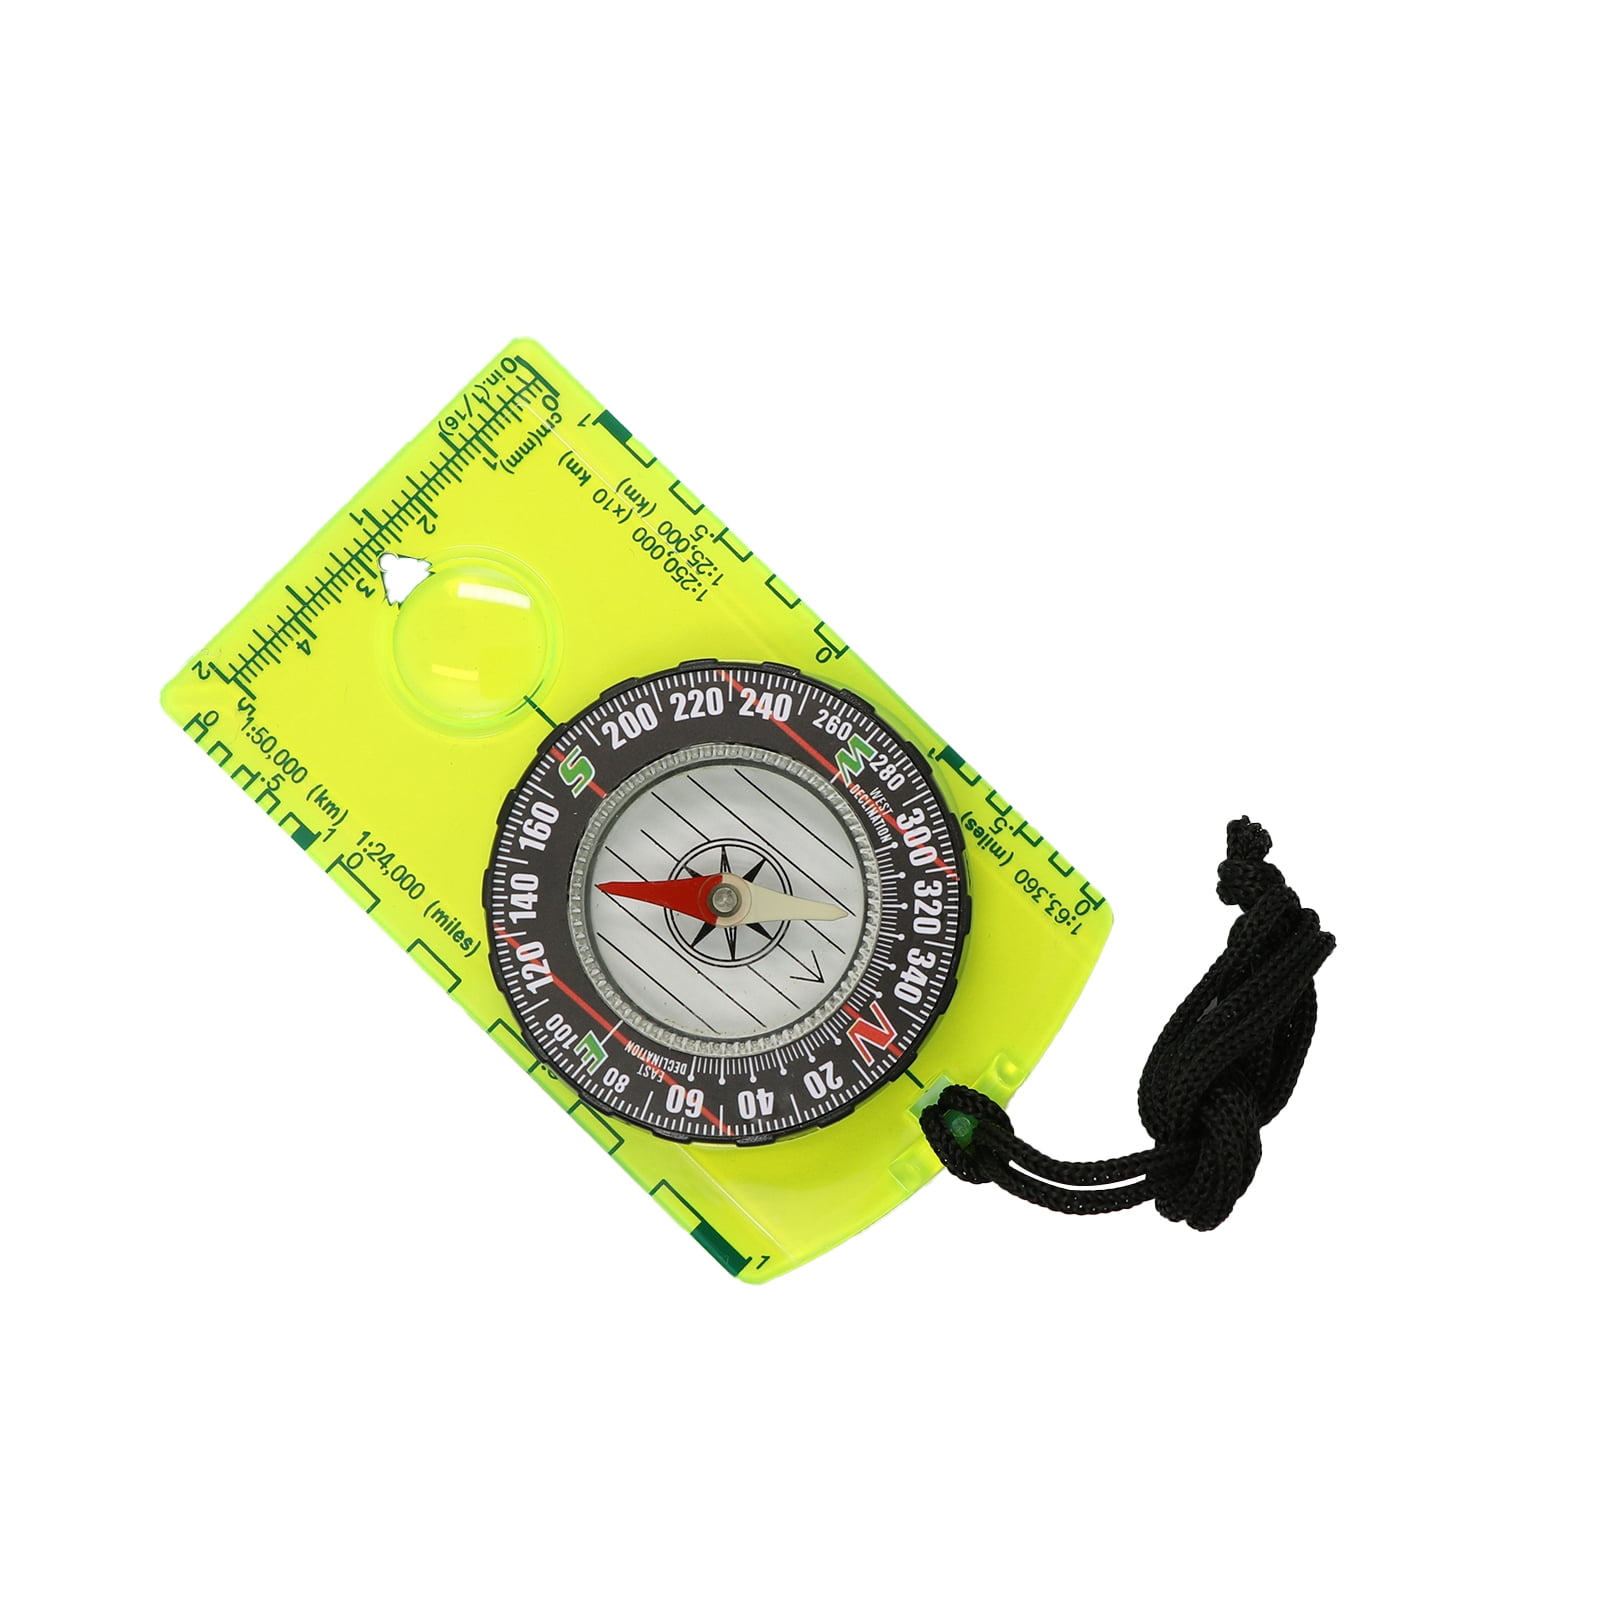 = Coleman Outdoor Compass With LED Light Lanyard Convenient Illumination NEW 